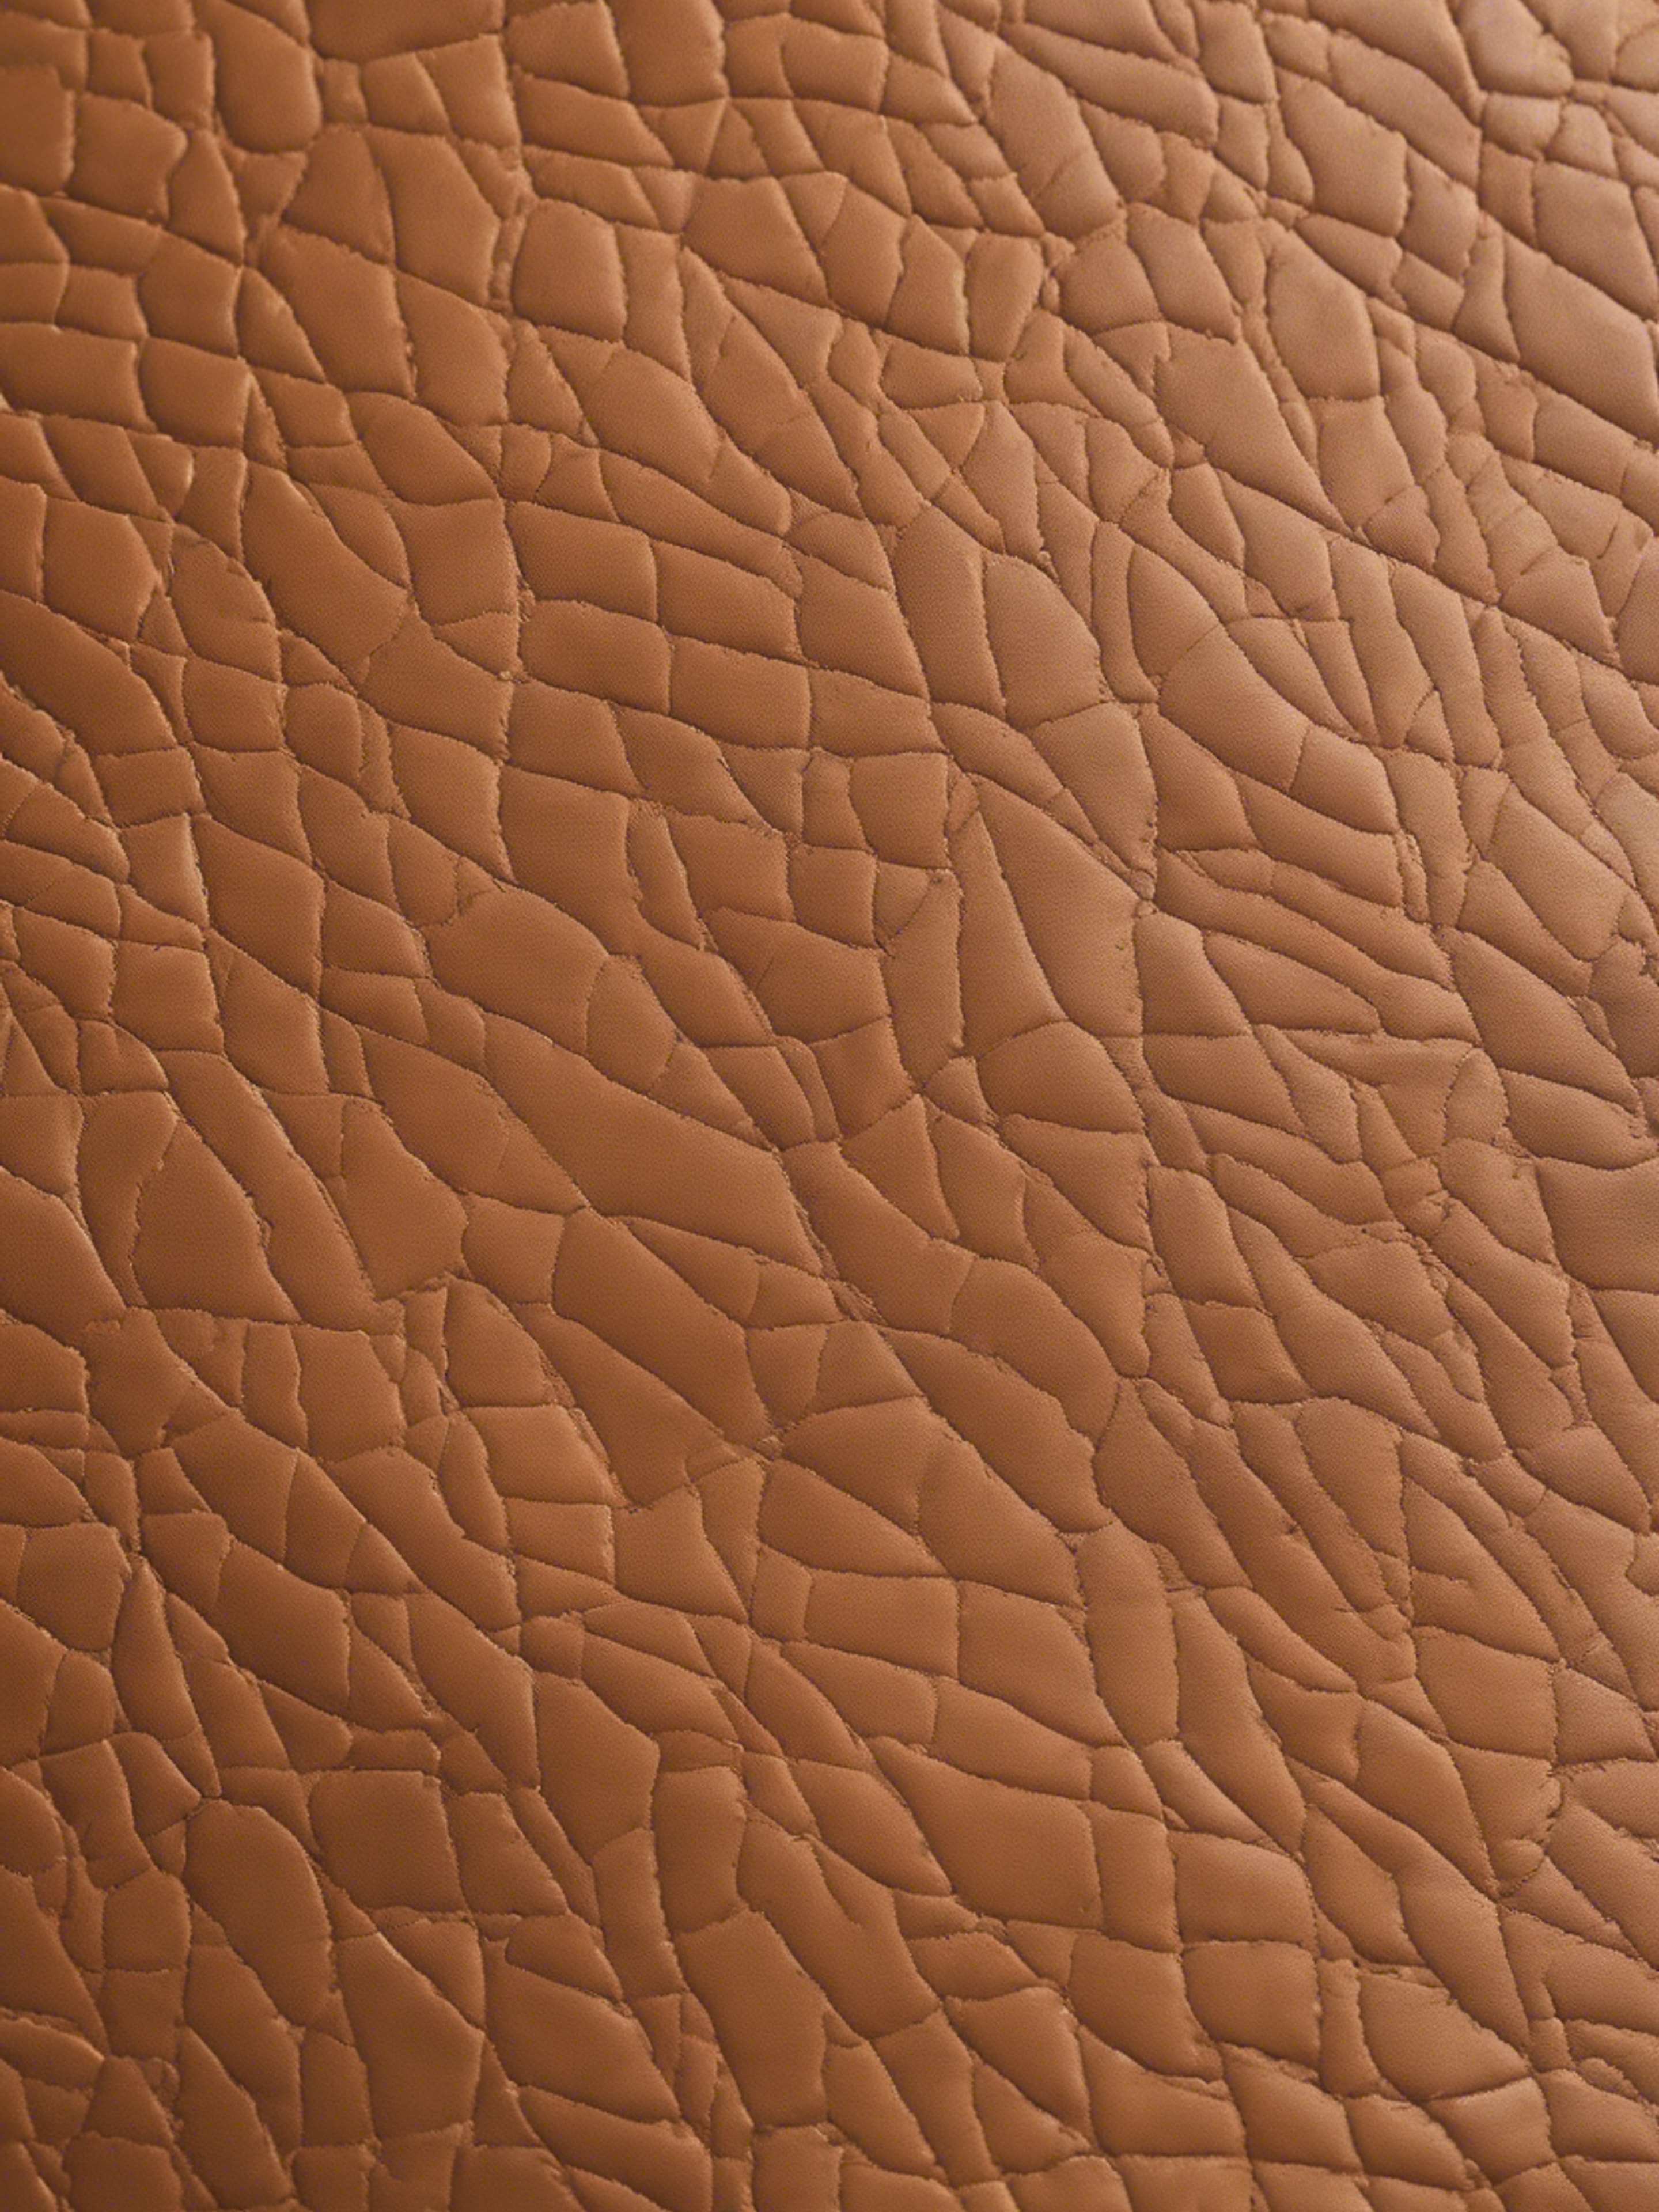 A close up detail of textured tan leather with visible creases and imperfections. Обои[dcf720cc5804433d887d]